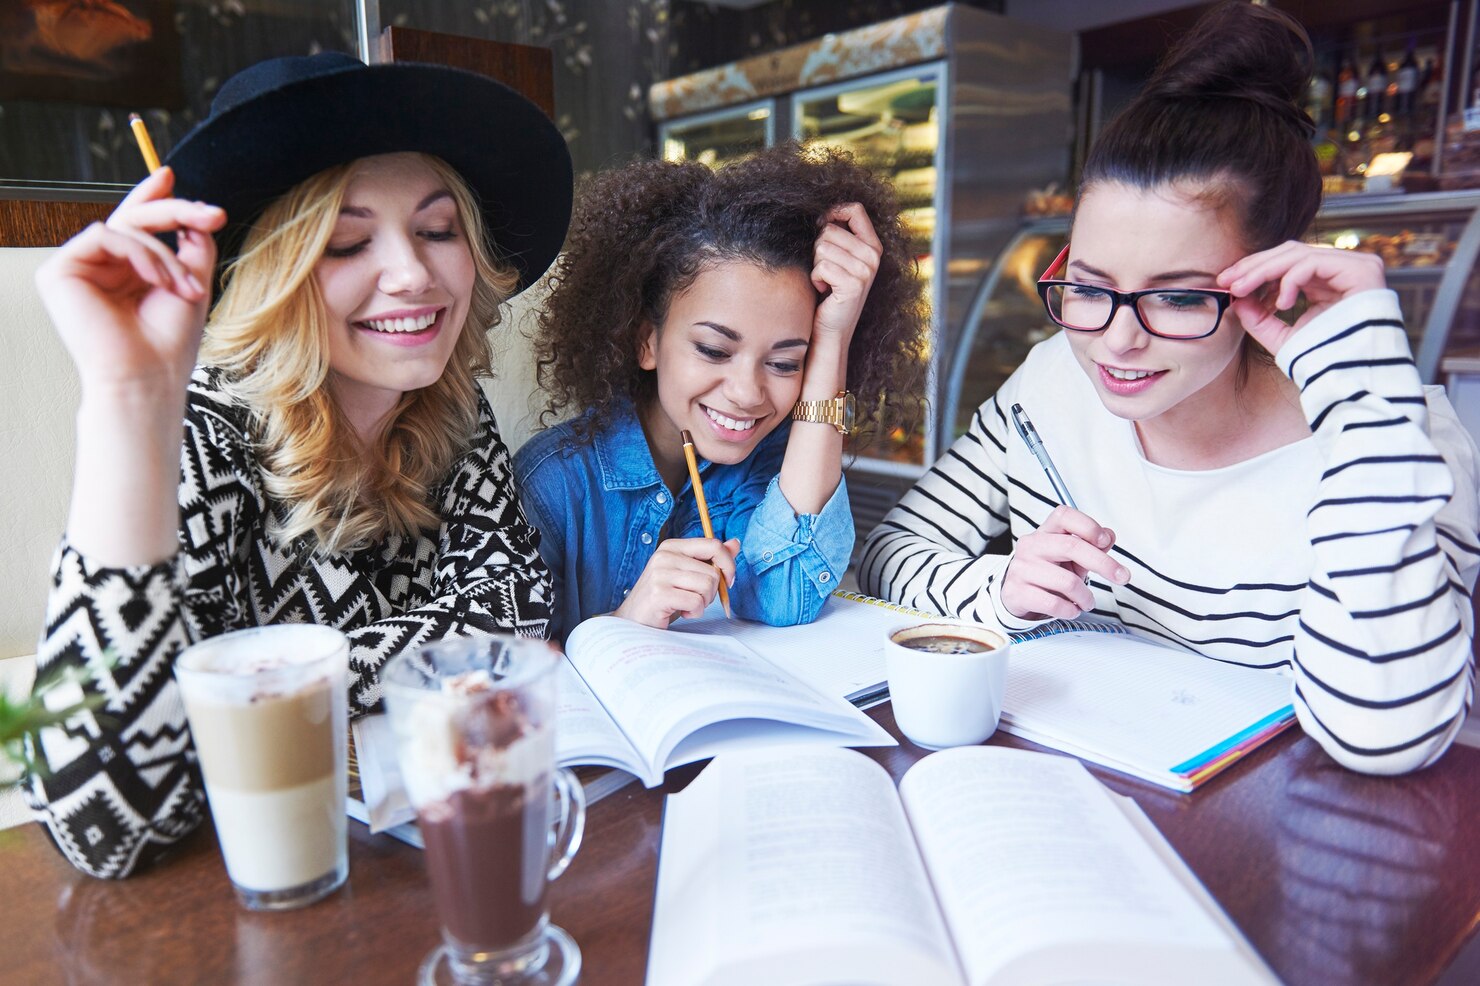 The Top 5 Cafes to Study for College Students in Washington D.C.